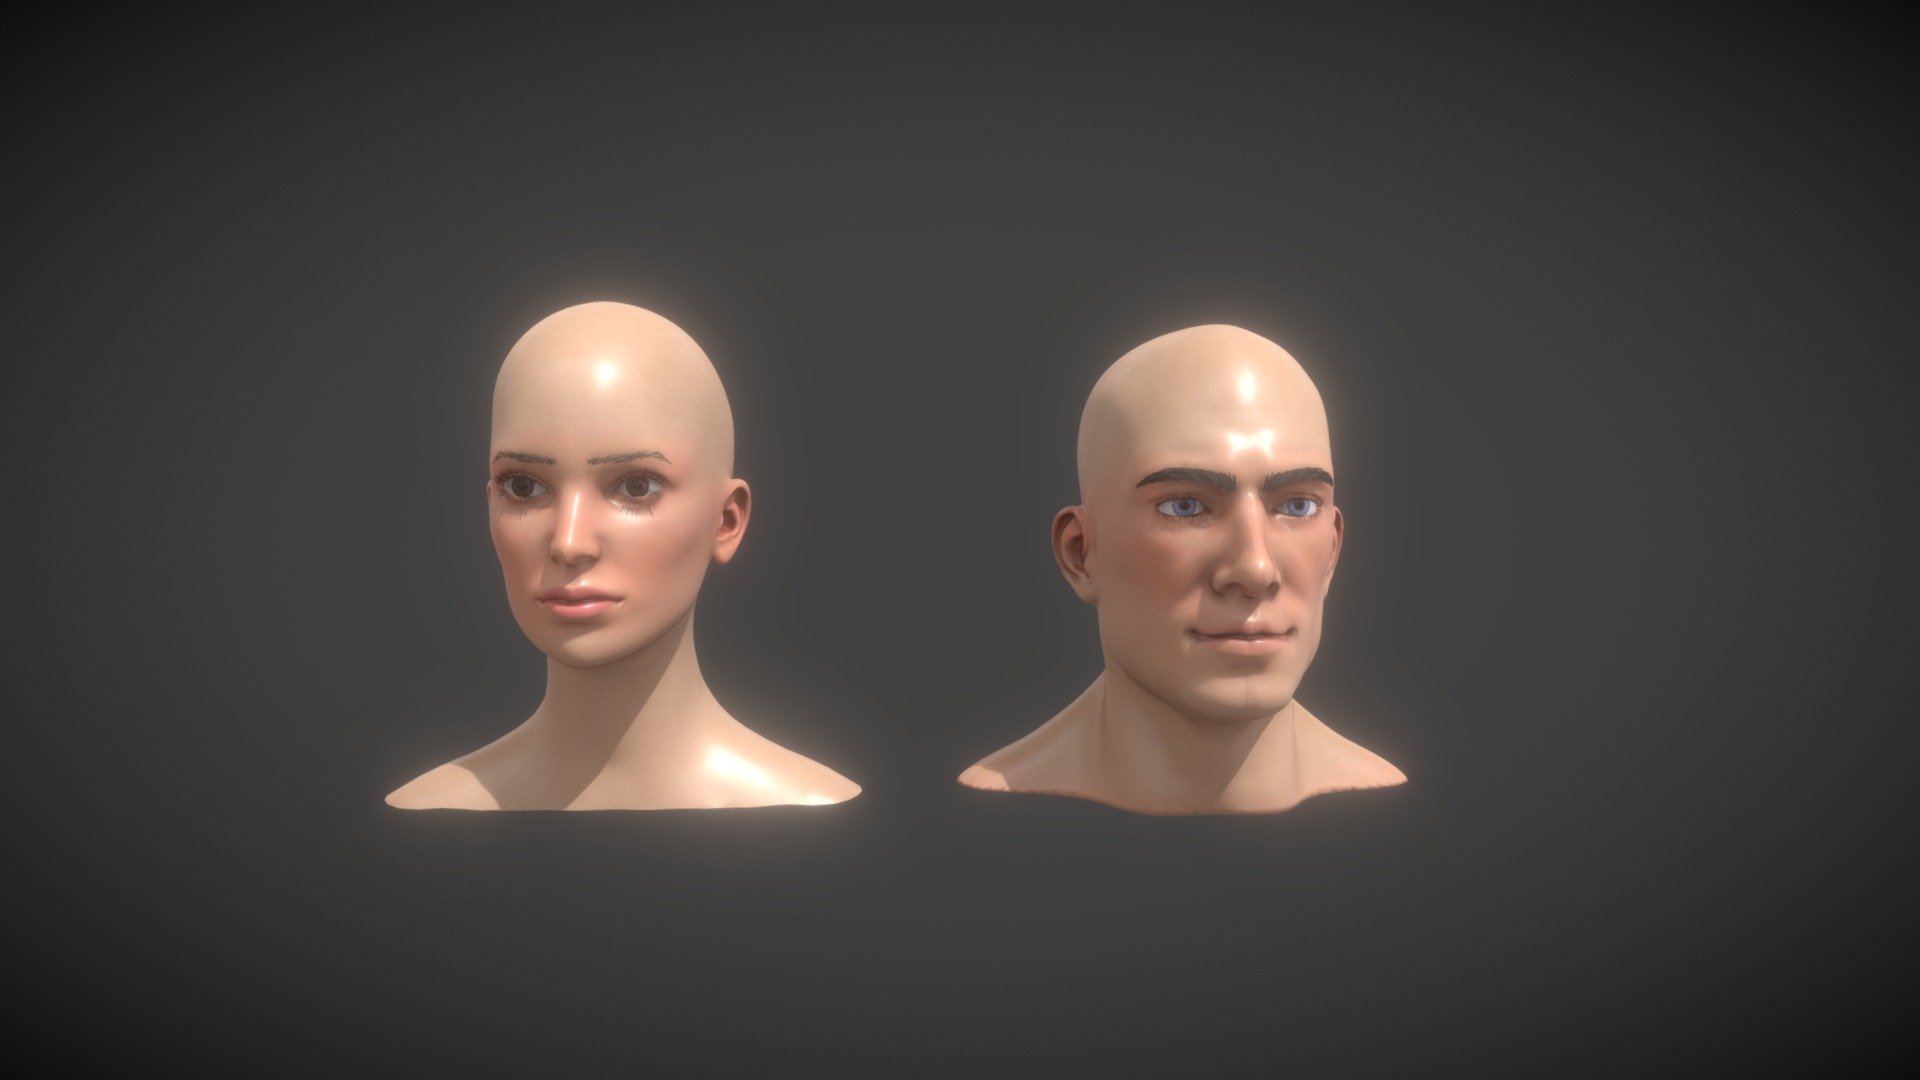 Realistic Male and Female Head 3D Model Animated with Facial Expressions consists of:  




Realistic Male Head 3D Model Animated Facial Expressions

Realistic Female Head 3D Model Animated Facial Expressions

Technical details:  




File formats included: FBX, OBJ, ABC, DAE, GLB, PLY, STL, BLEND, UnityPackage

Render engine: Eevee

Polygons (male head): 70,947 (head) | 1,024 (eyes) | 2,272 (eyebrows) | 956 (eyelashes)

Vertices (male head): 71,165 (head) | 964 (eyes) | 5,112 (eyebrows) | 2,216 (eyelashes)

Polygons (female head): 55,102 (head) | 16,384 (eyes) | 2,320 (eyebrows) | 1,042 (eyelashes)

Vertices (female head): 55,639 (head) | 16,132 (eyes) | 5,220 (eyebrows) | 2,416 (eyelashes)

Models are rigged and animated.

10 animations are included: turn left, turn right, turn up, turn down, look left, look right, look up, look down, speak, blink. All animations are full cycles.

More details in the 1st comment below 3d model